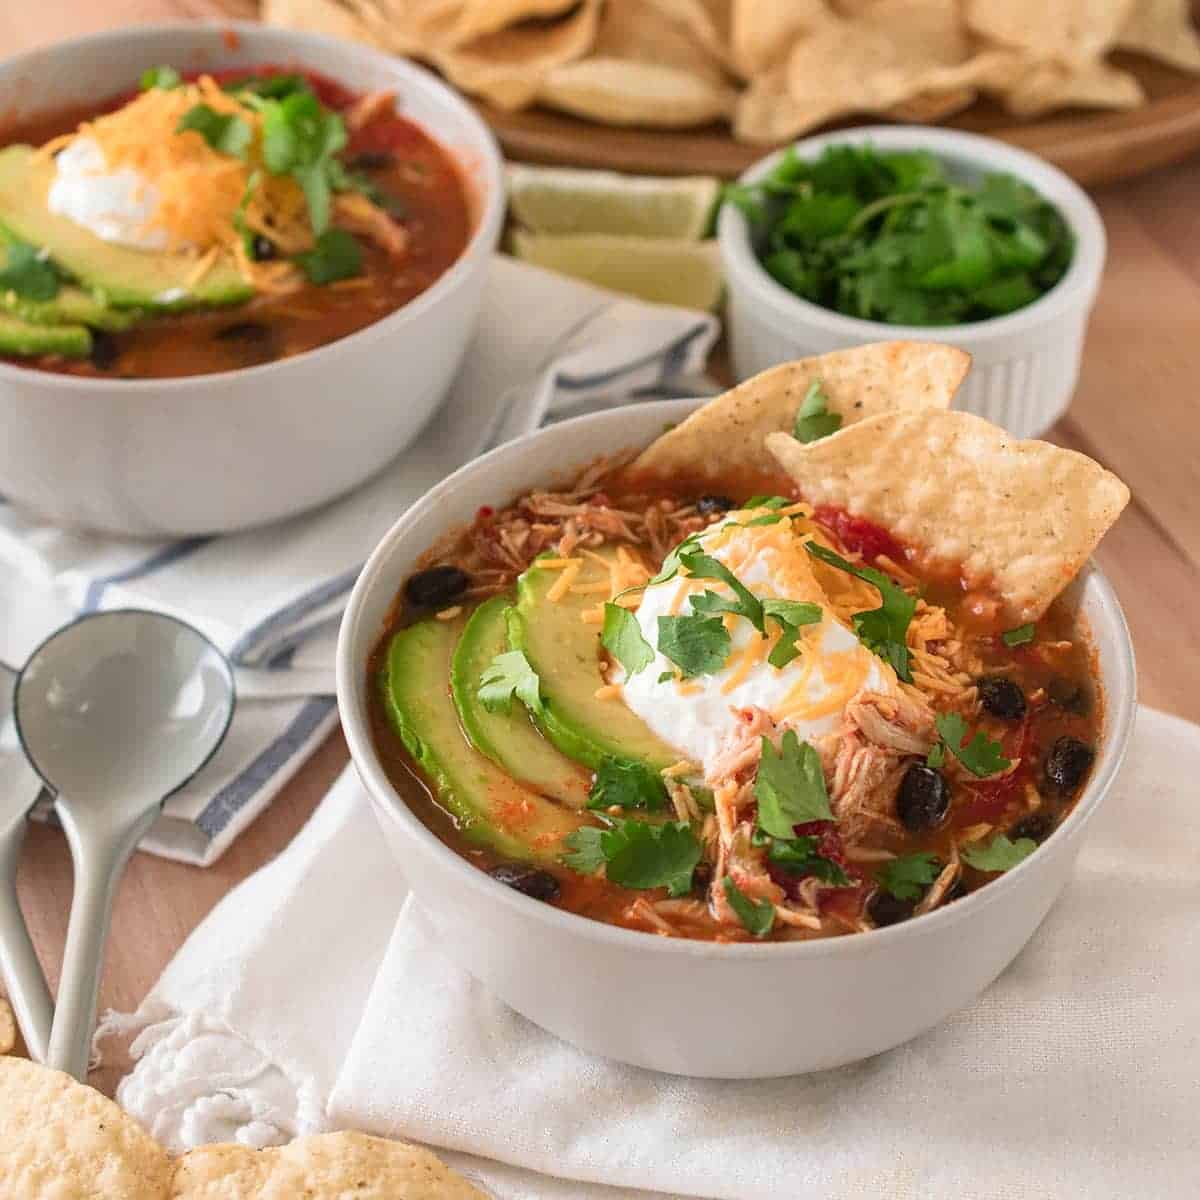 Tortilla soup with toppings of avocado and sour cream. Spoons, a second bowl, a bowl of cilantro and tortilla chips in background.